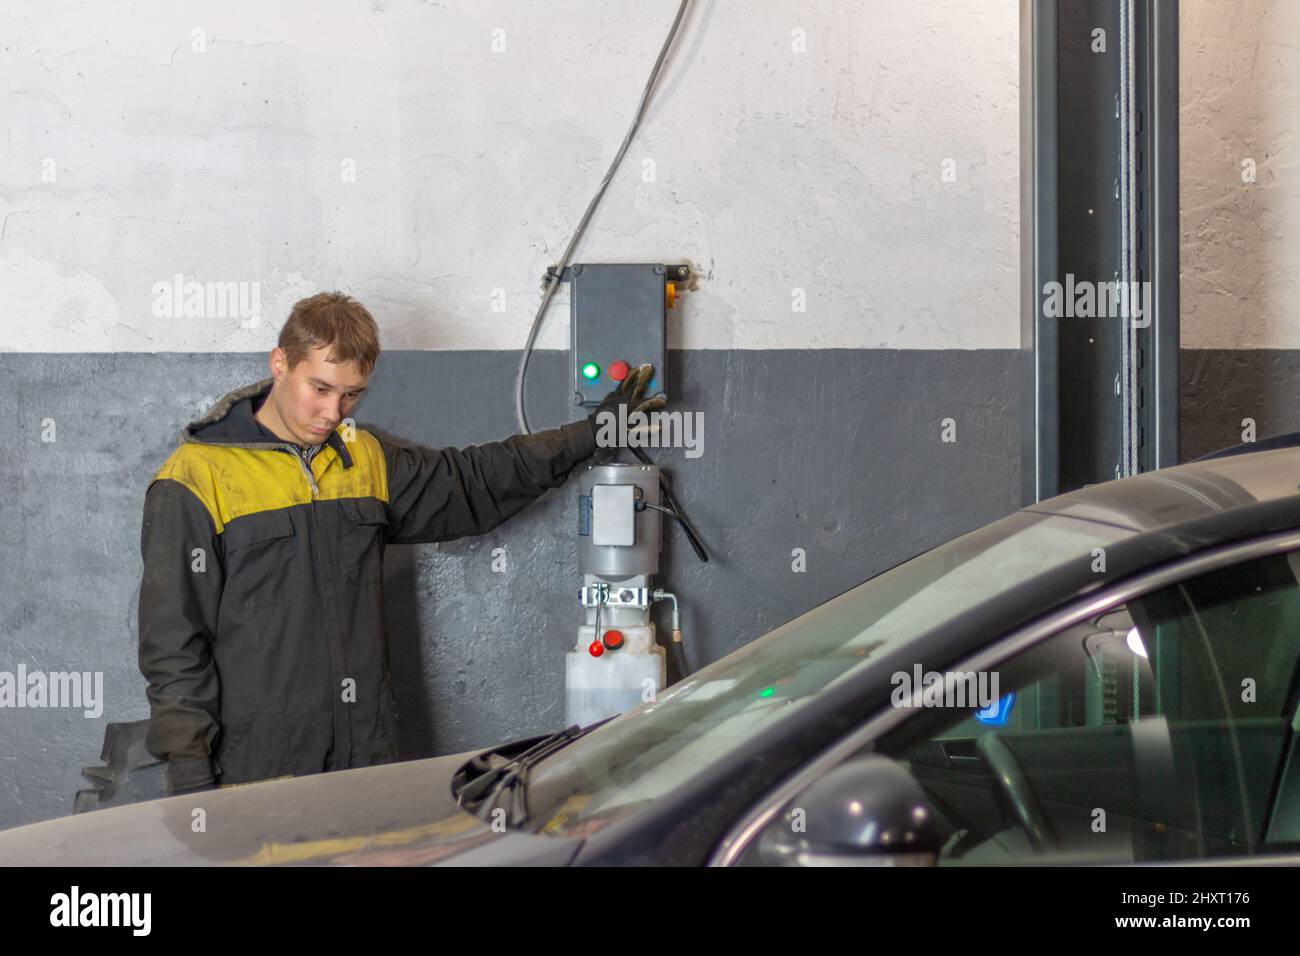 Hardworking man mechanic  lifting car standing at the service station. Stock Photo